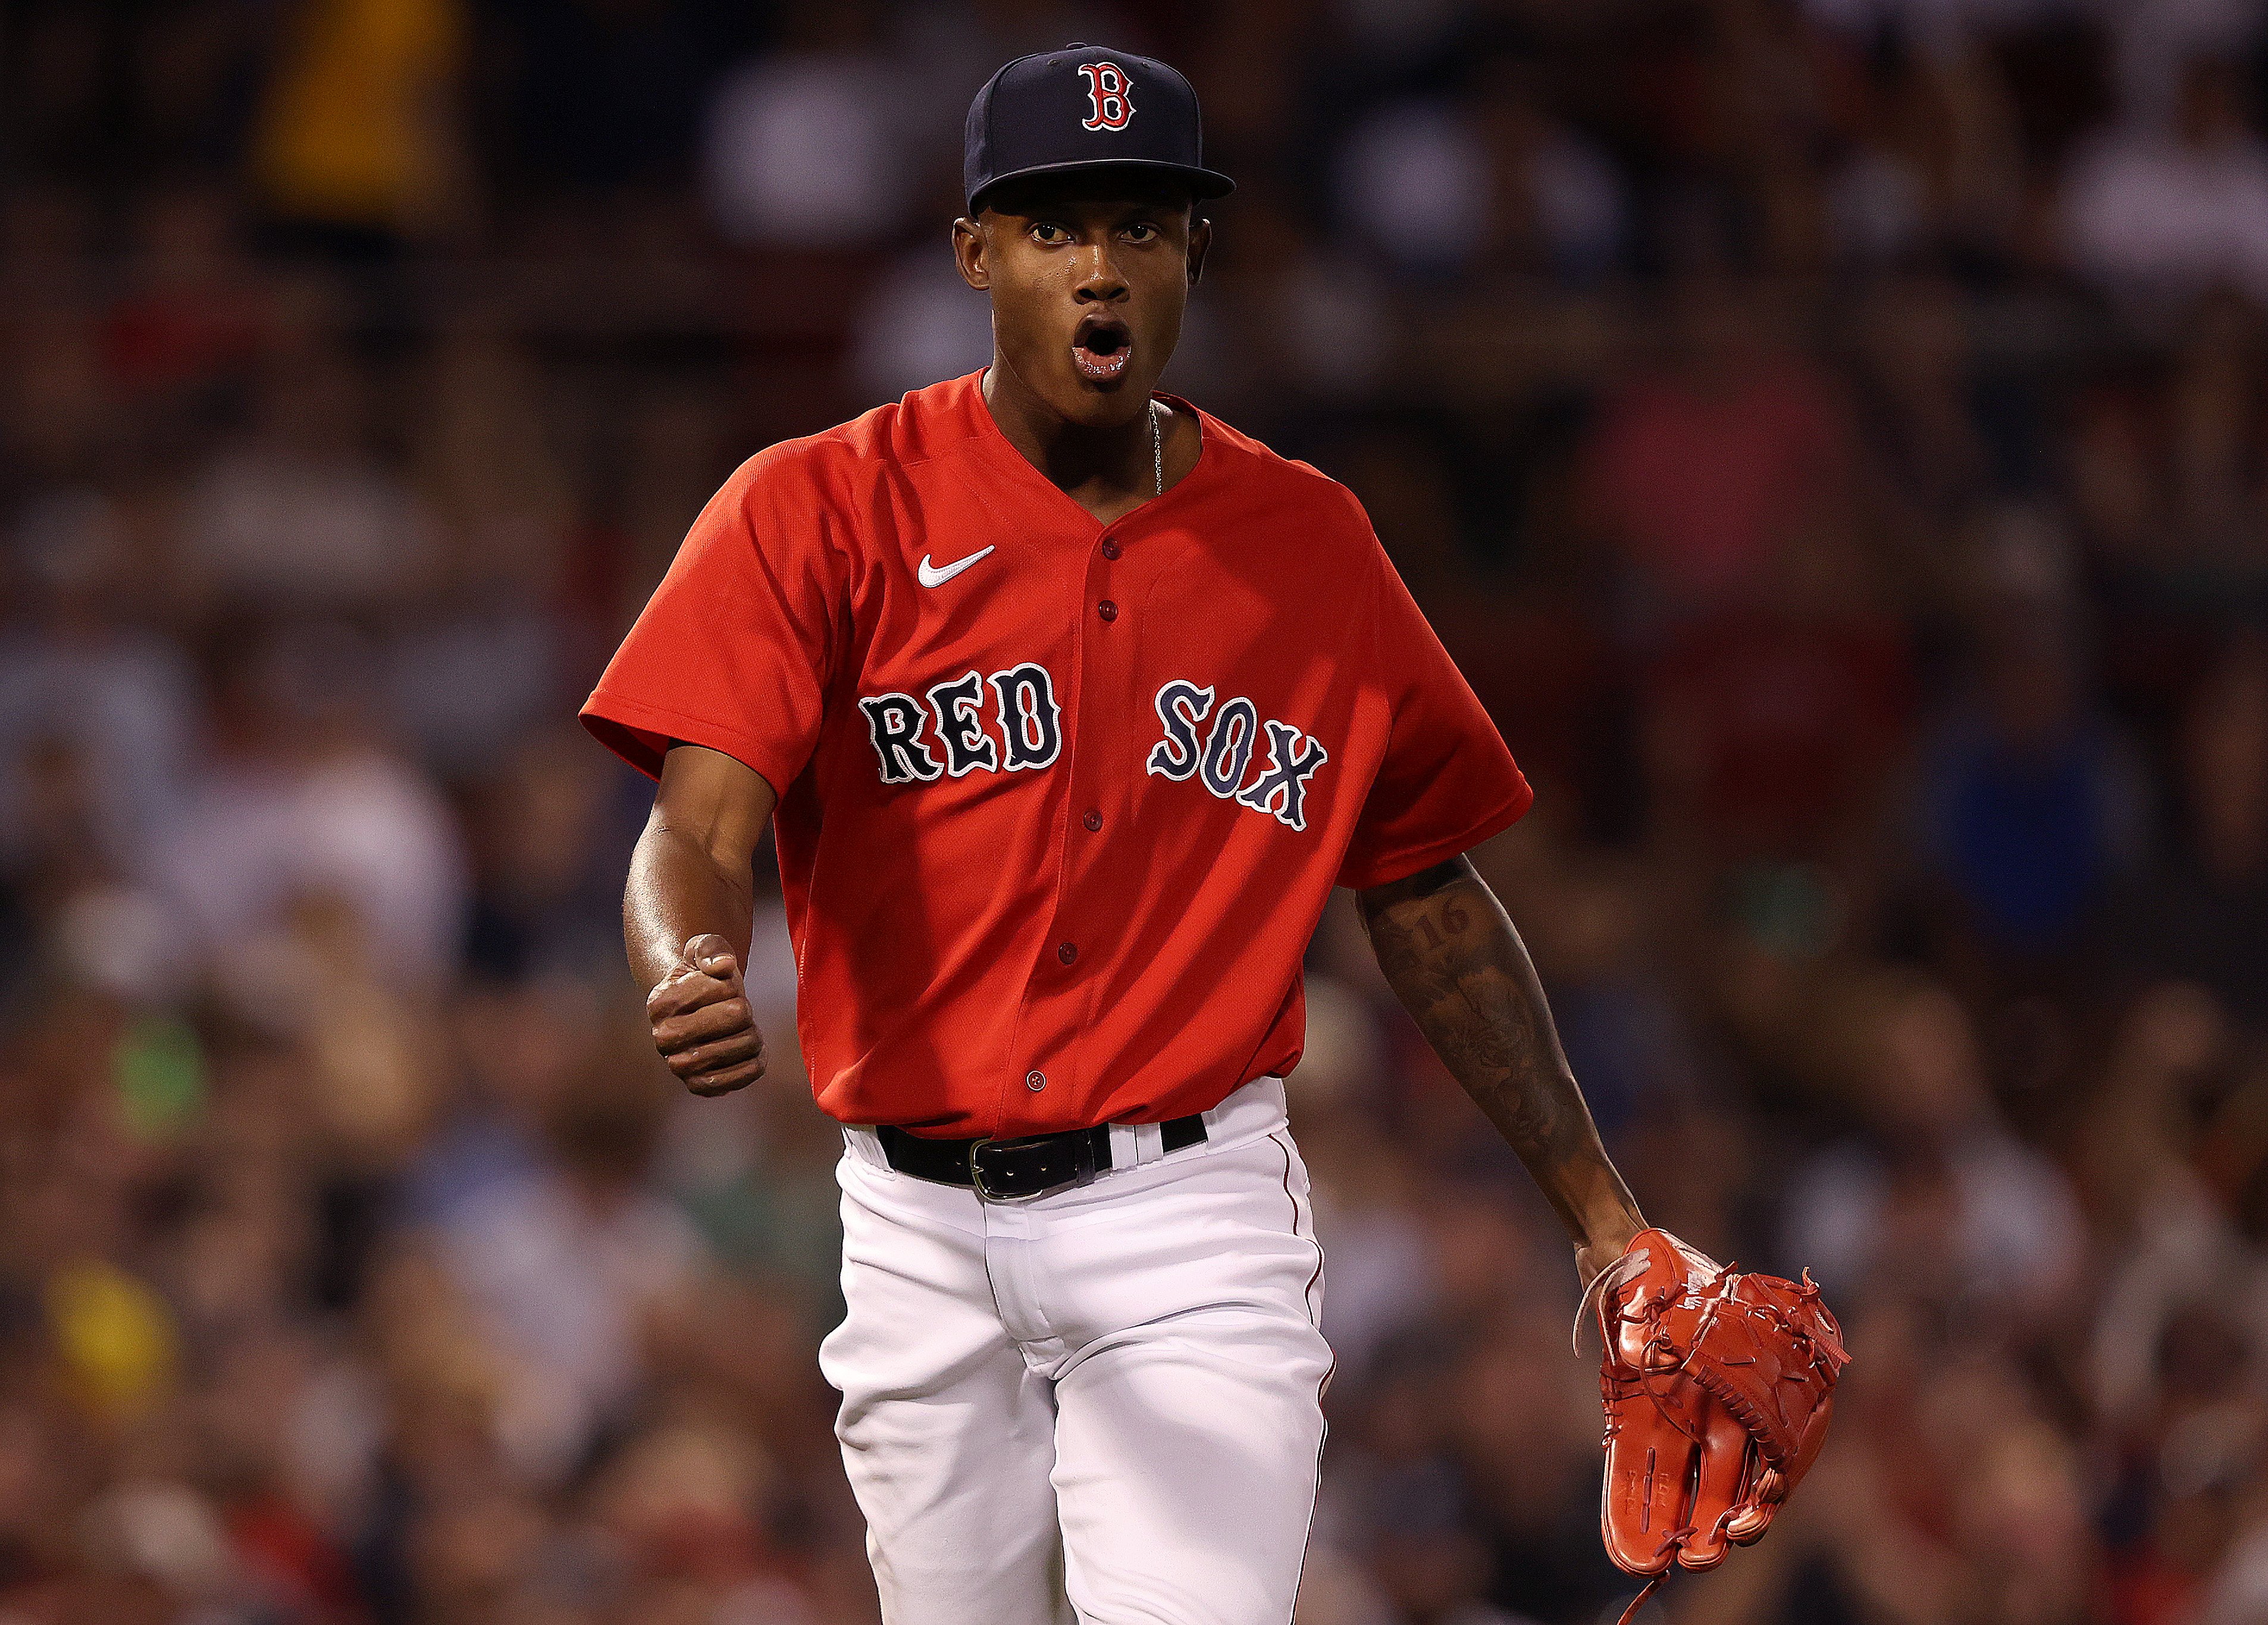 Phillips Valdez inherited a mess, then pitched the Red Sox right out of it  to help them defeat the Yankees - The Boston Globe